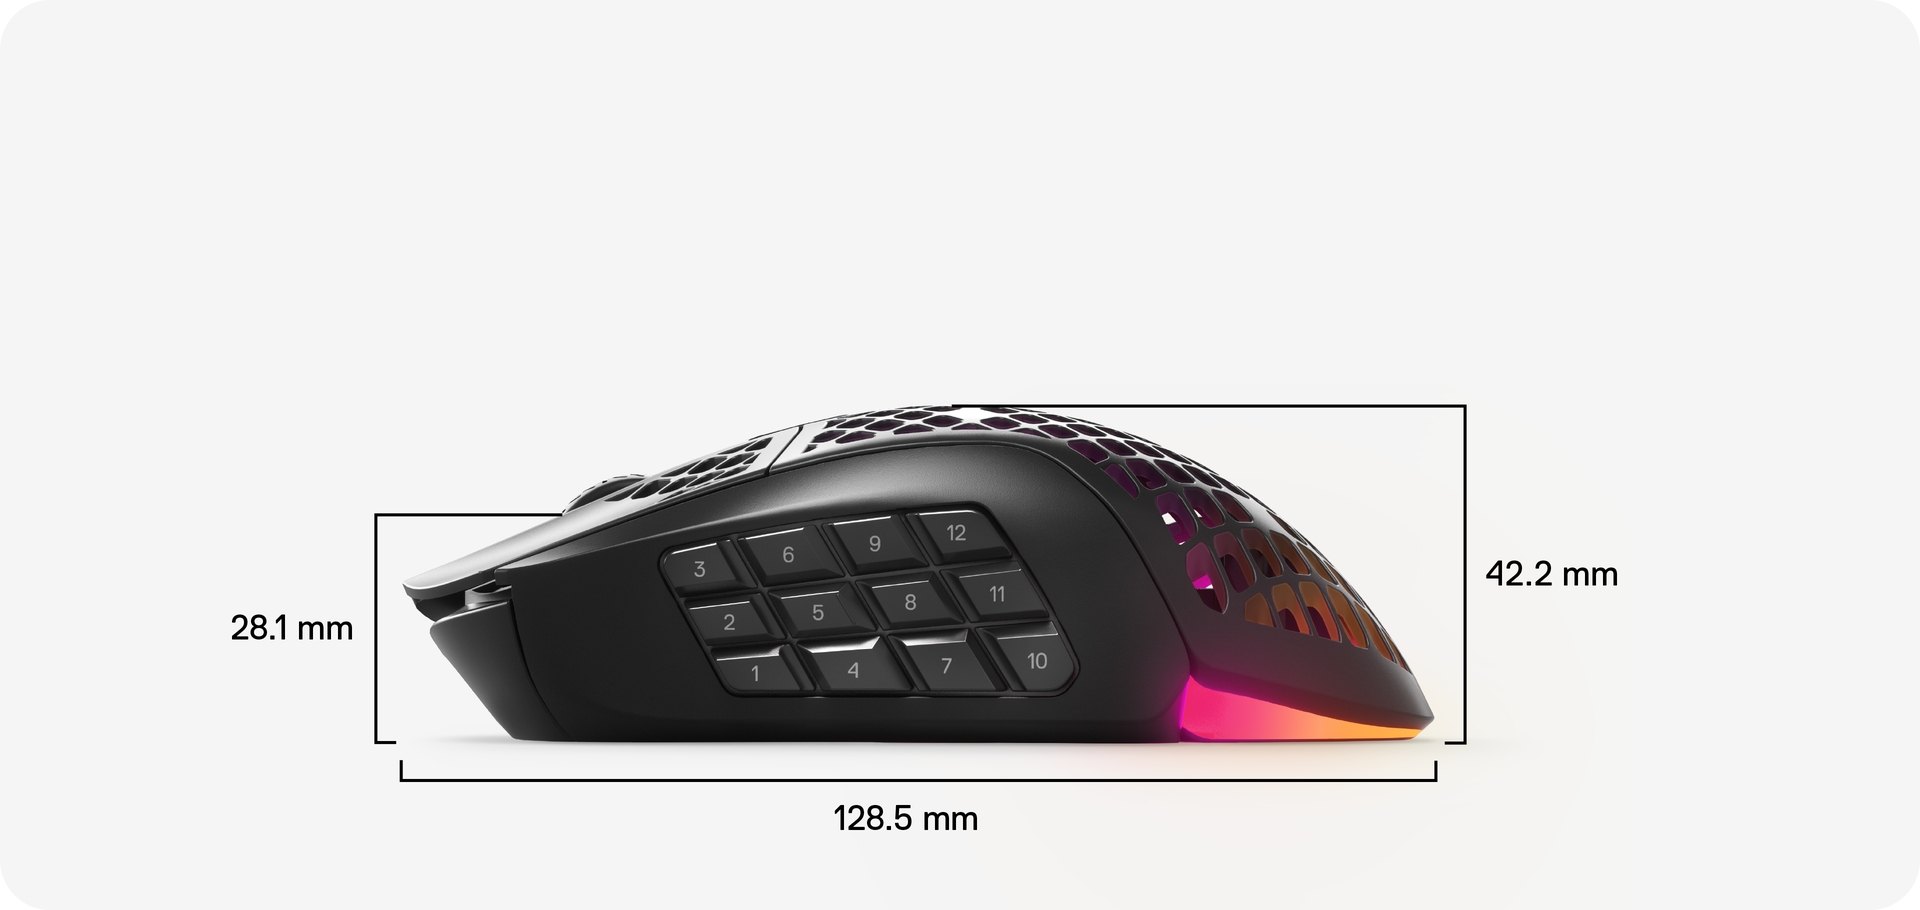 Side view with dimensions for the Aerox 9 Wireless mouse: 42.1 MM from palm rest to base, 26.7 MM from scroll wheel to base, and 128.8 MM in total length.